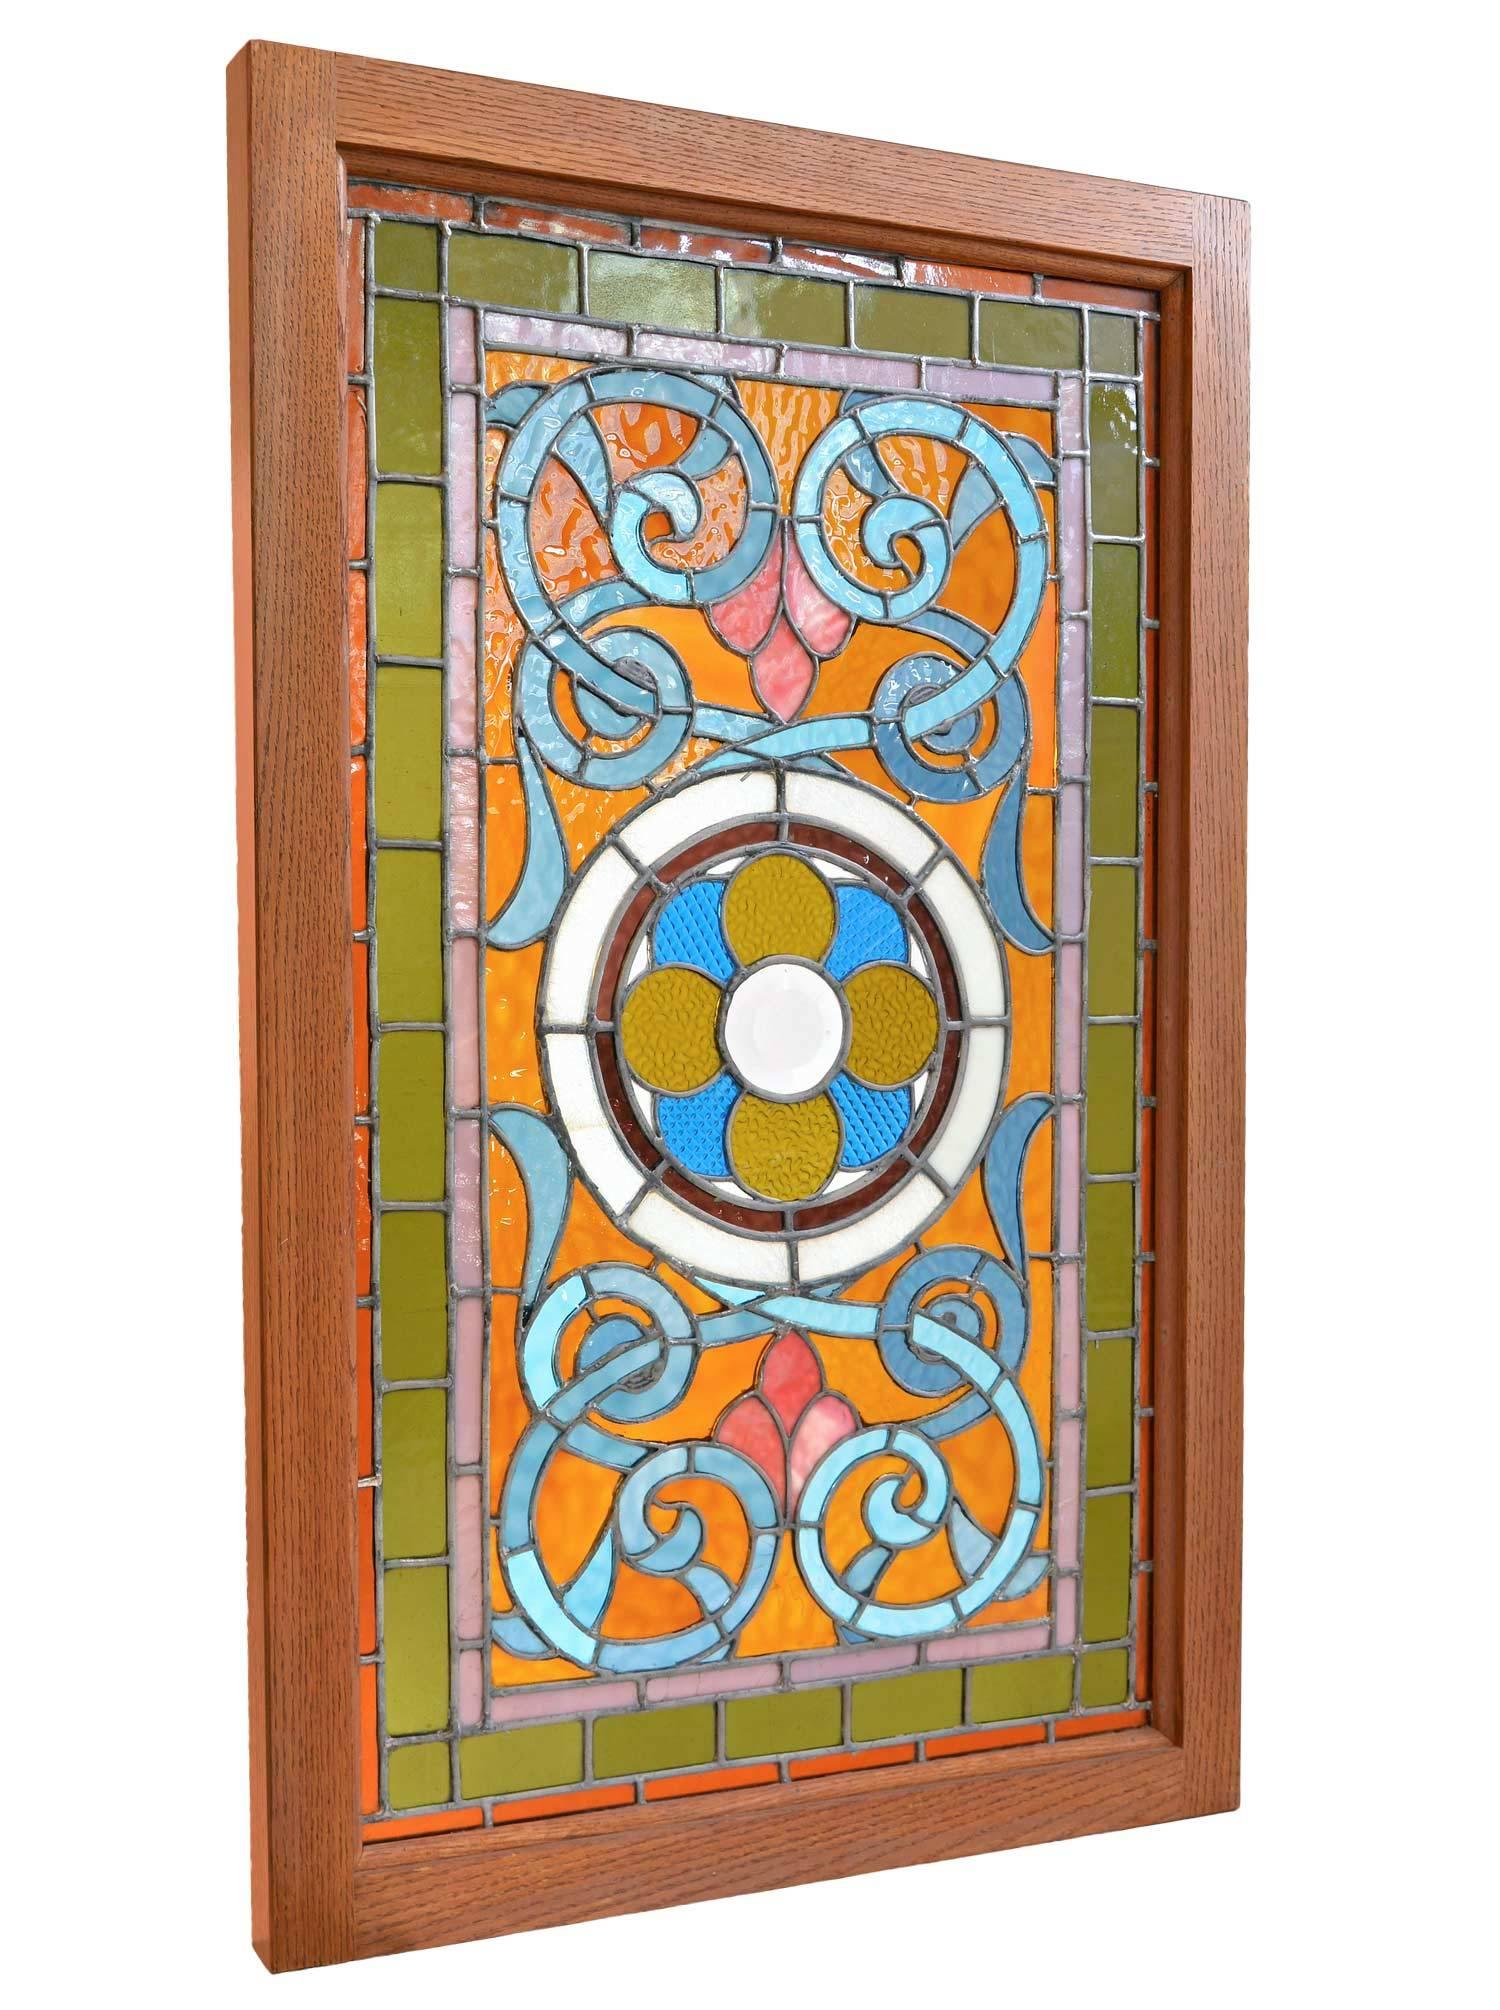 This beautiful Victorian stained glass window features amber and teal blue glass, and has a lovely pattern that centers on a large beveled rondelle in the center. The colors are bright, cheerful, and extremely vibrant.